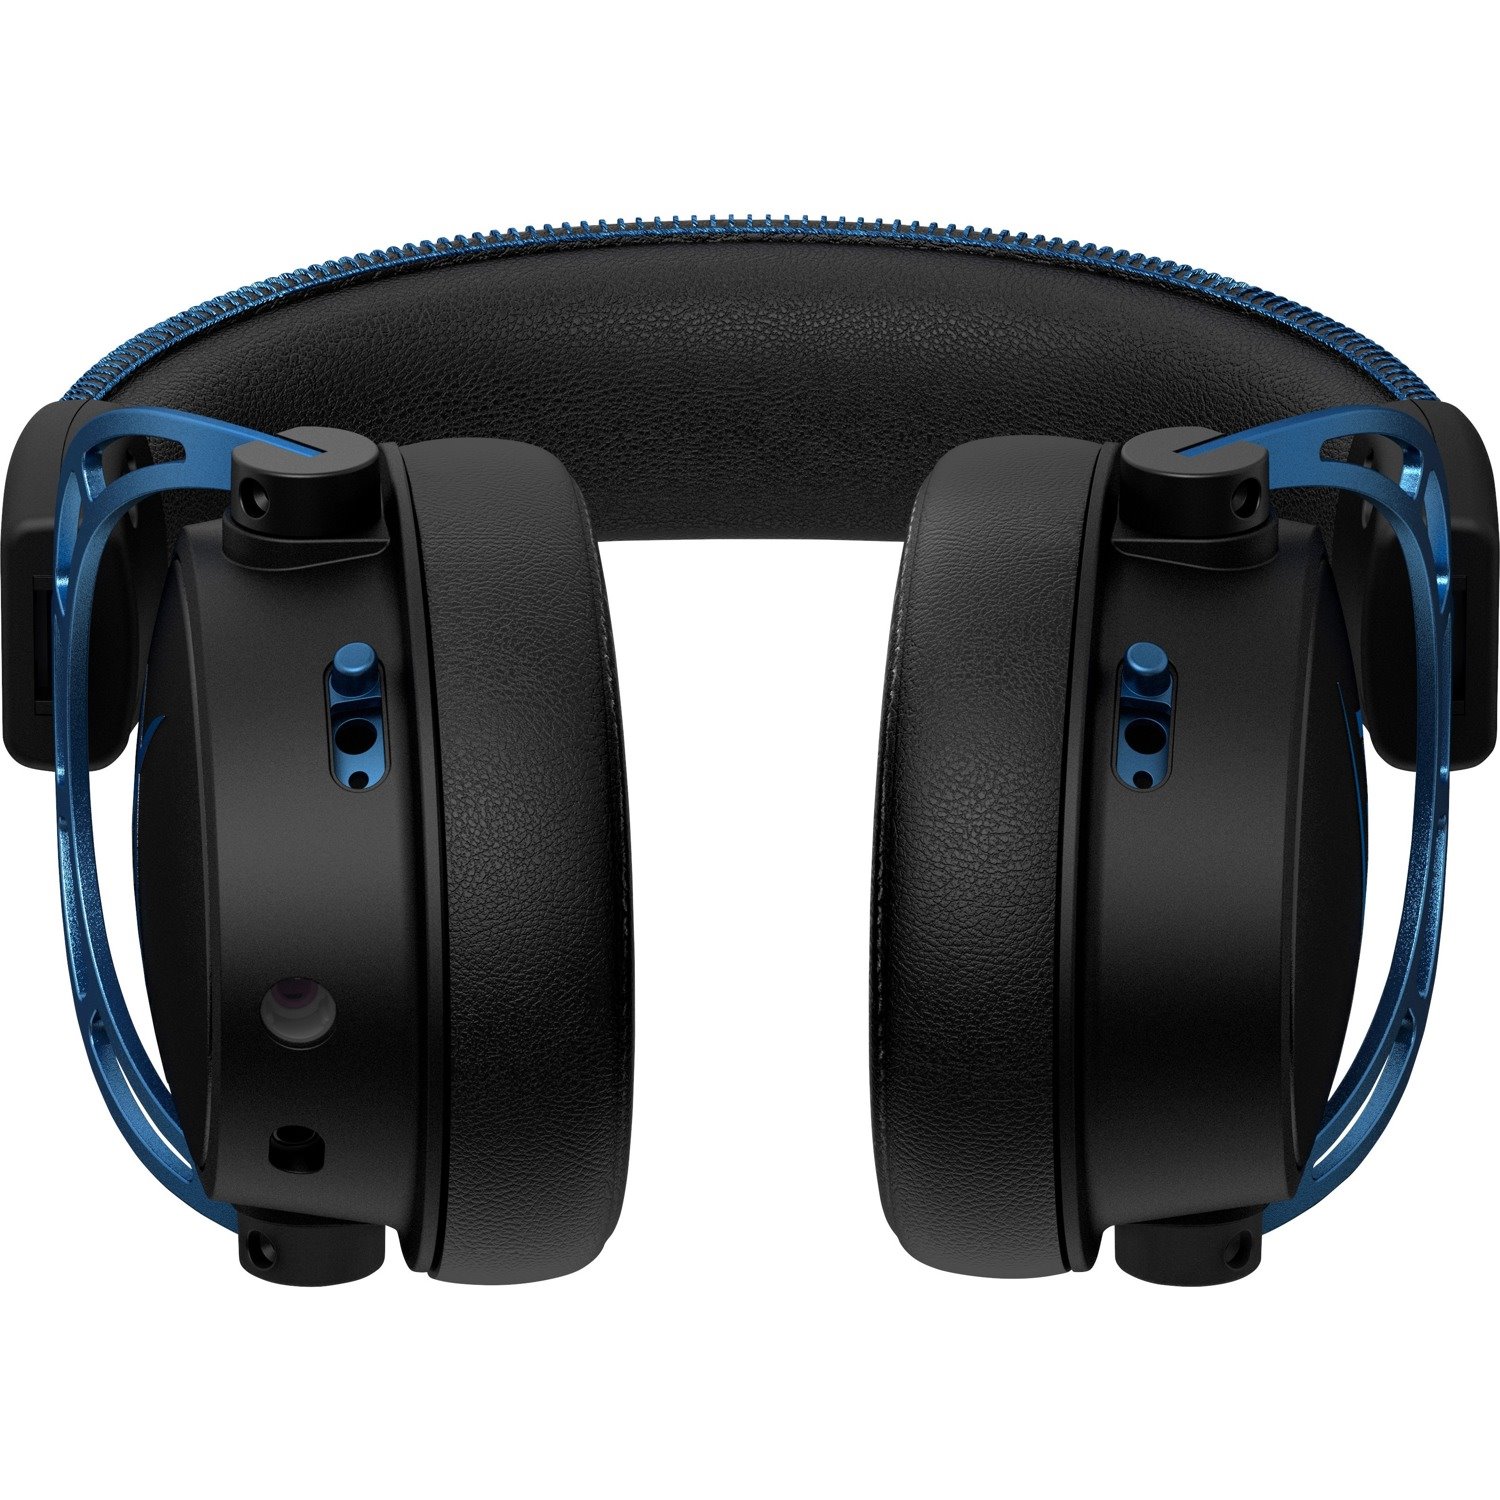 HP Cloud Alpha S Wired Over-the-ear Stereo Gaming Headset - Blue